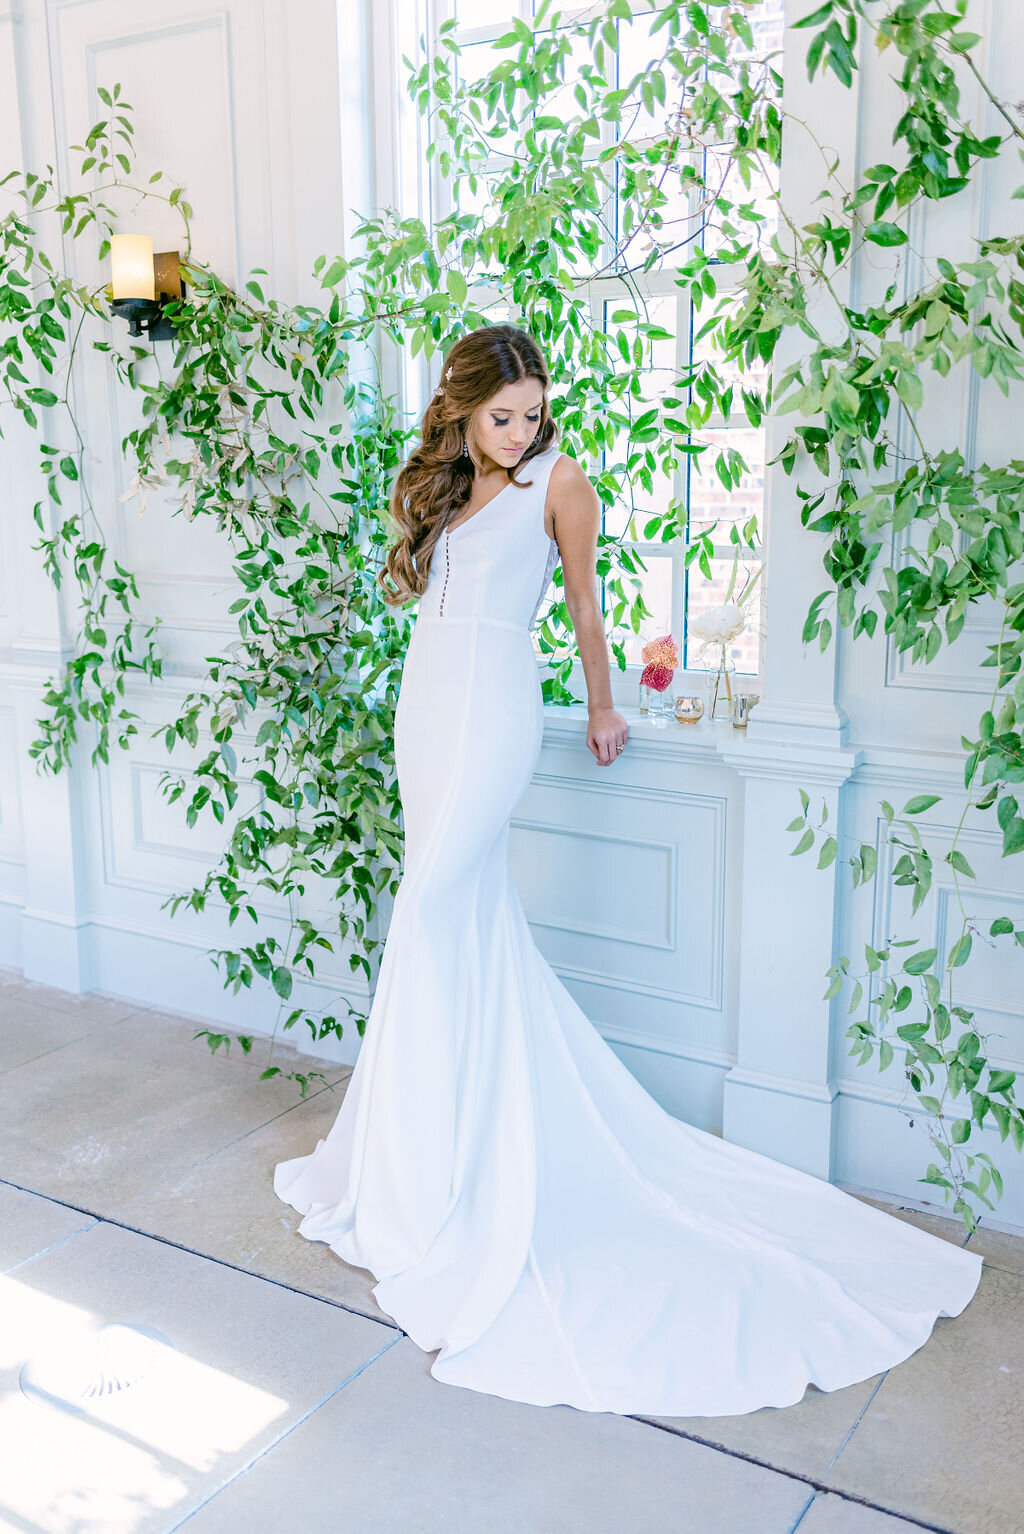 The Jane style is a timeless, crepe wedding gown with pearl accents by indie bridal designer Edith Elan.